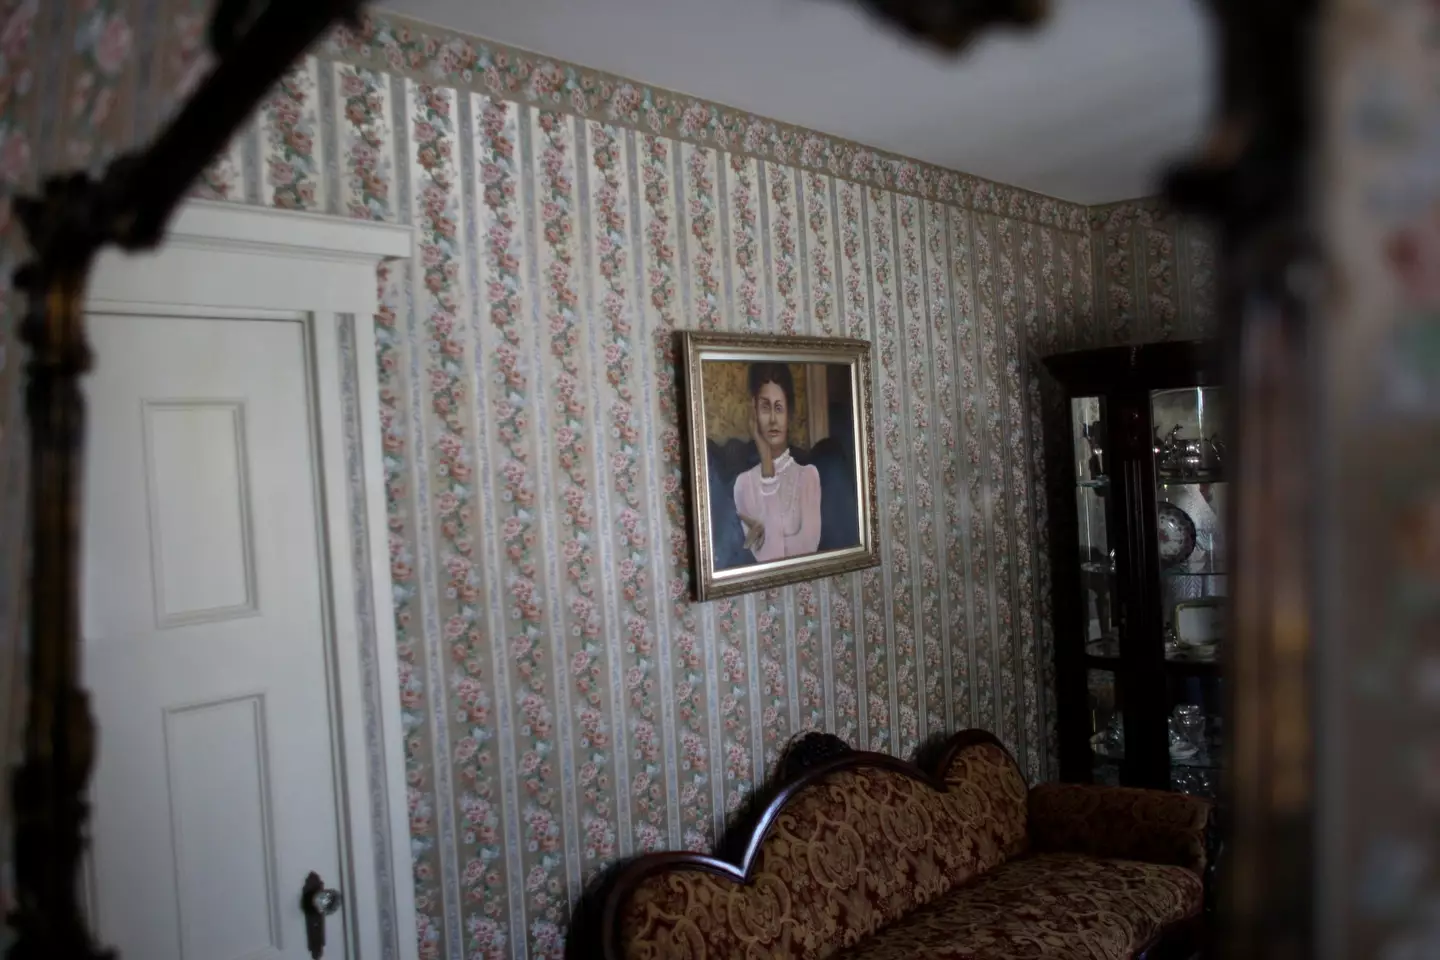 The Lizzie Borden House is now open to visitors.